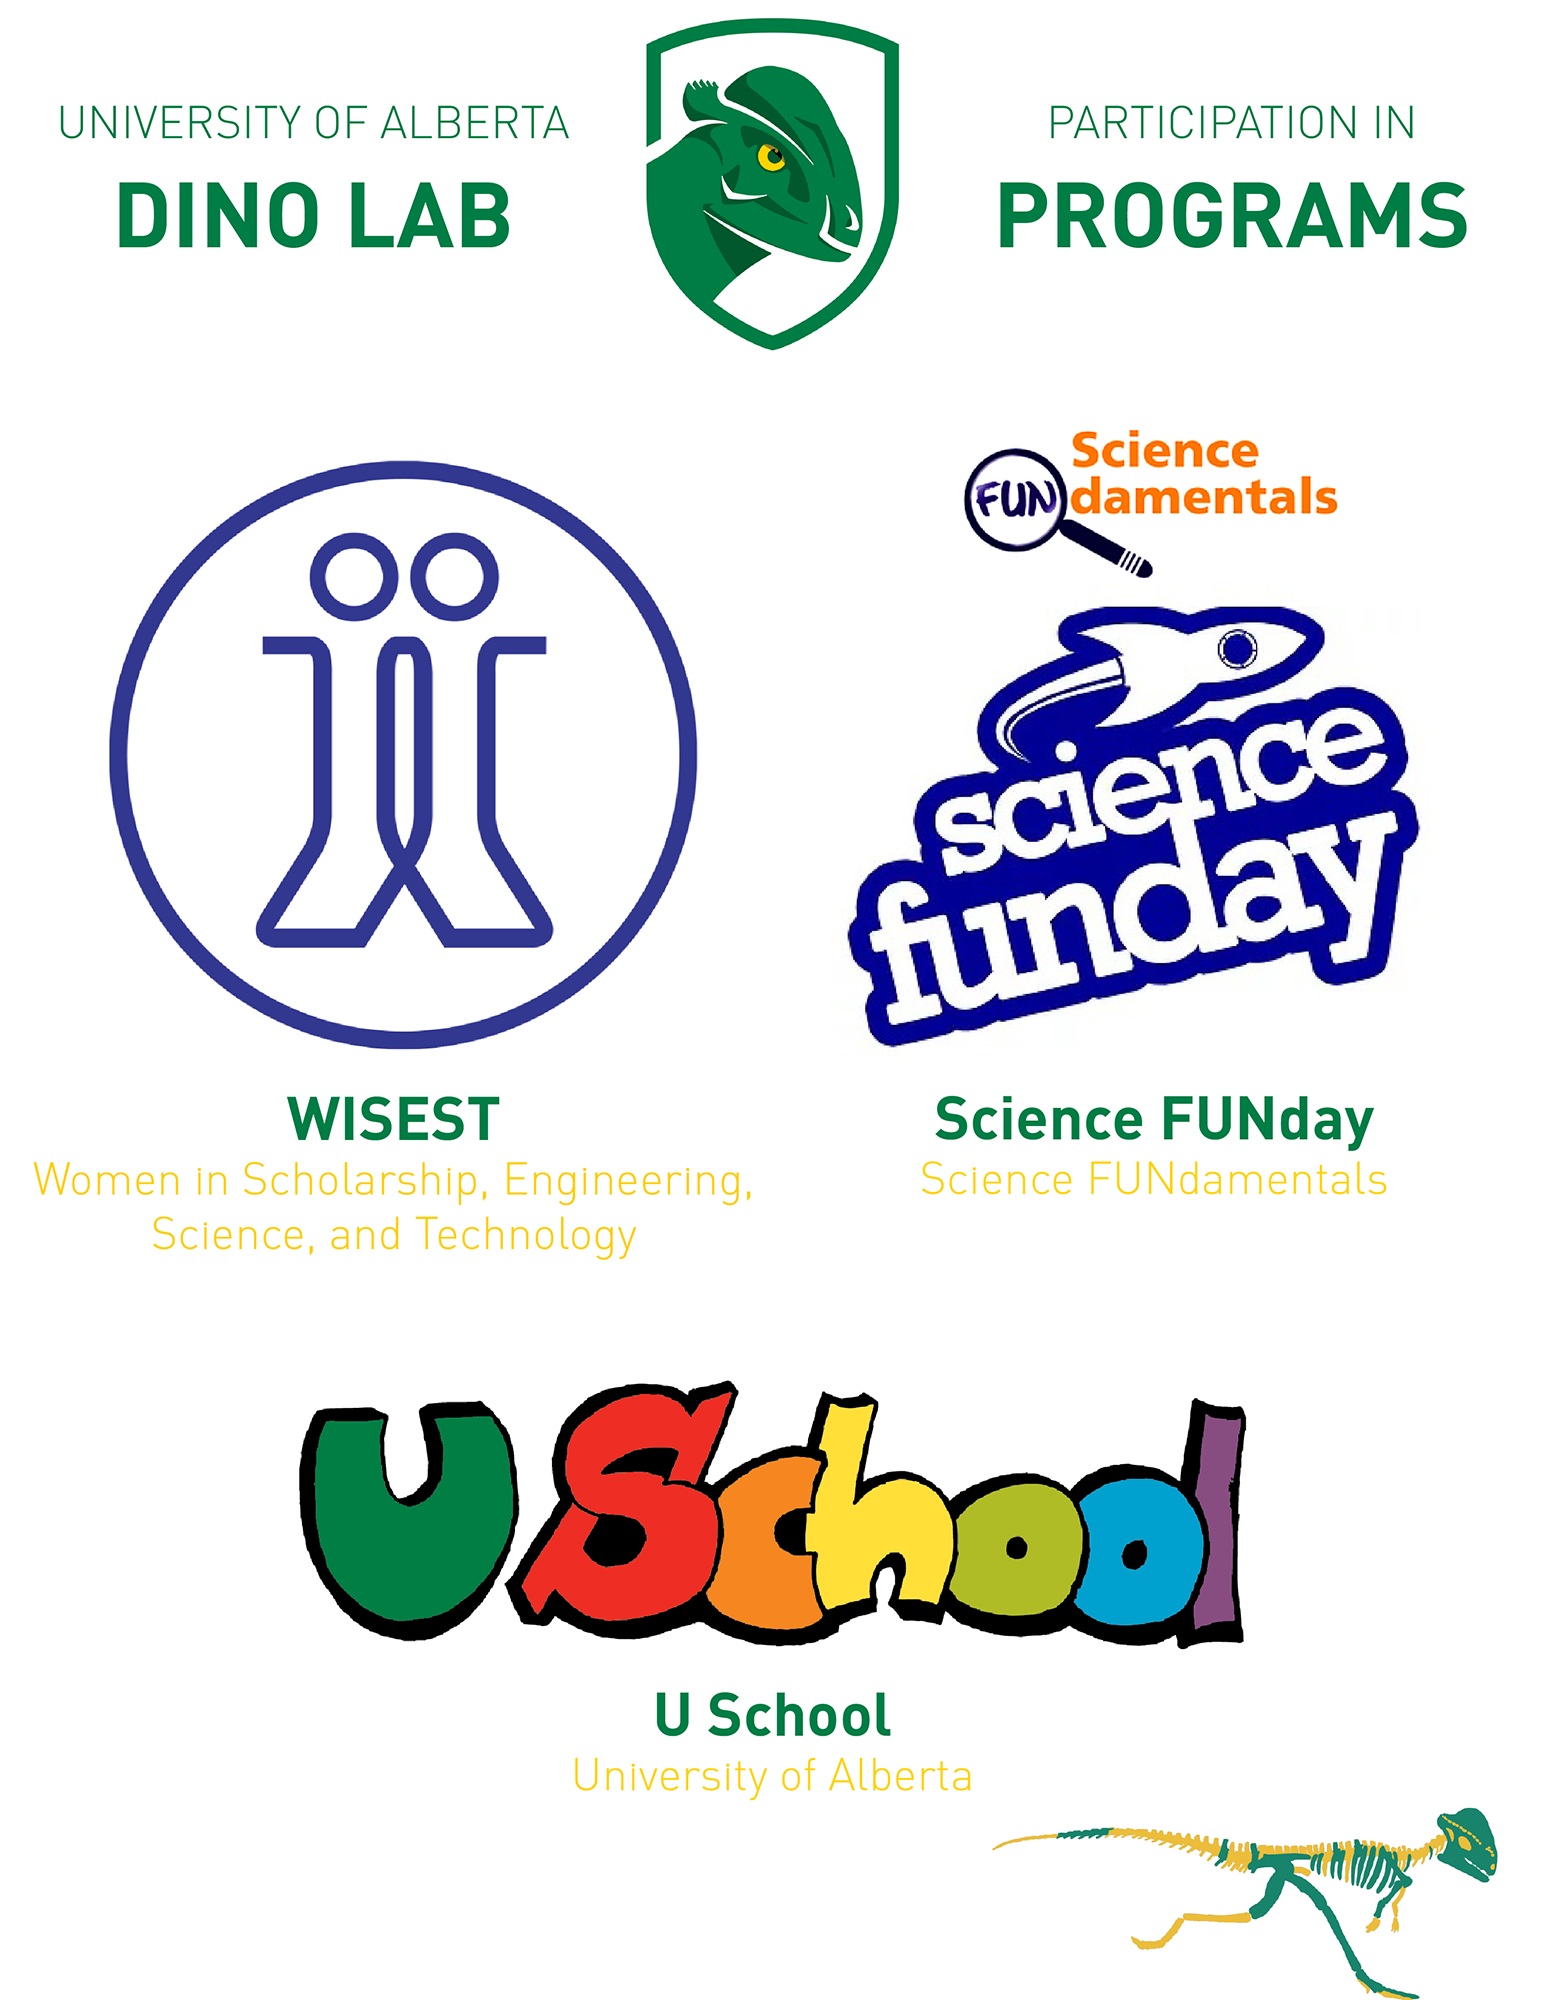 Dino Lab infographic: participation in programs (WISEST, Science FUNday, U School)